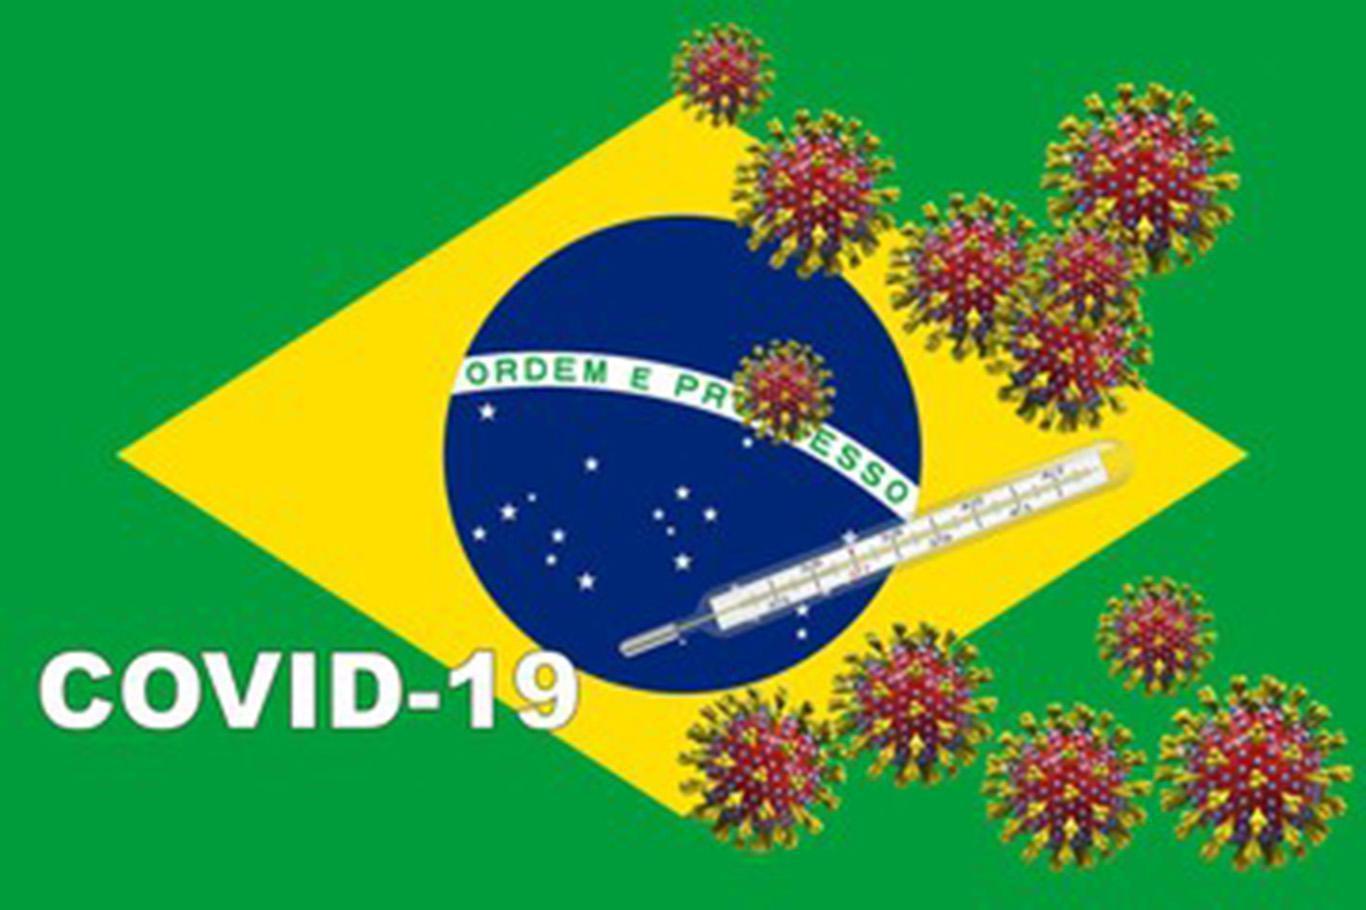 Coronavirus: Brazil reports 1,394 new deaths, 56,411 cases in the last 24 hours